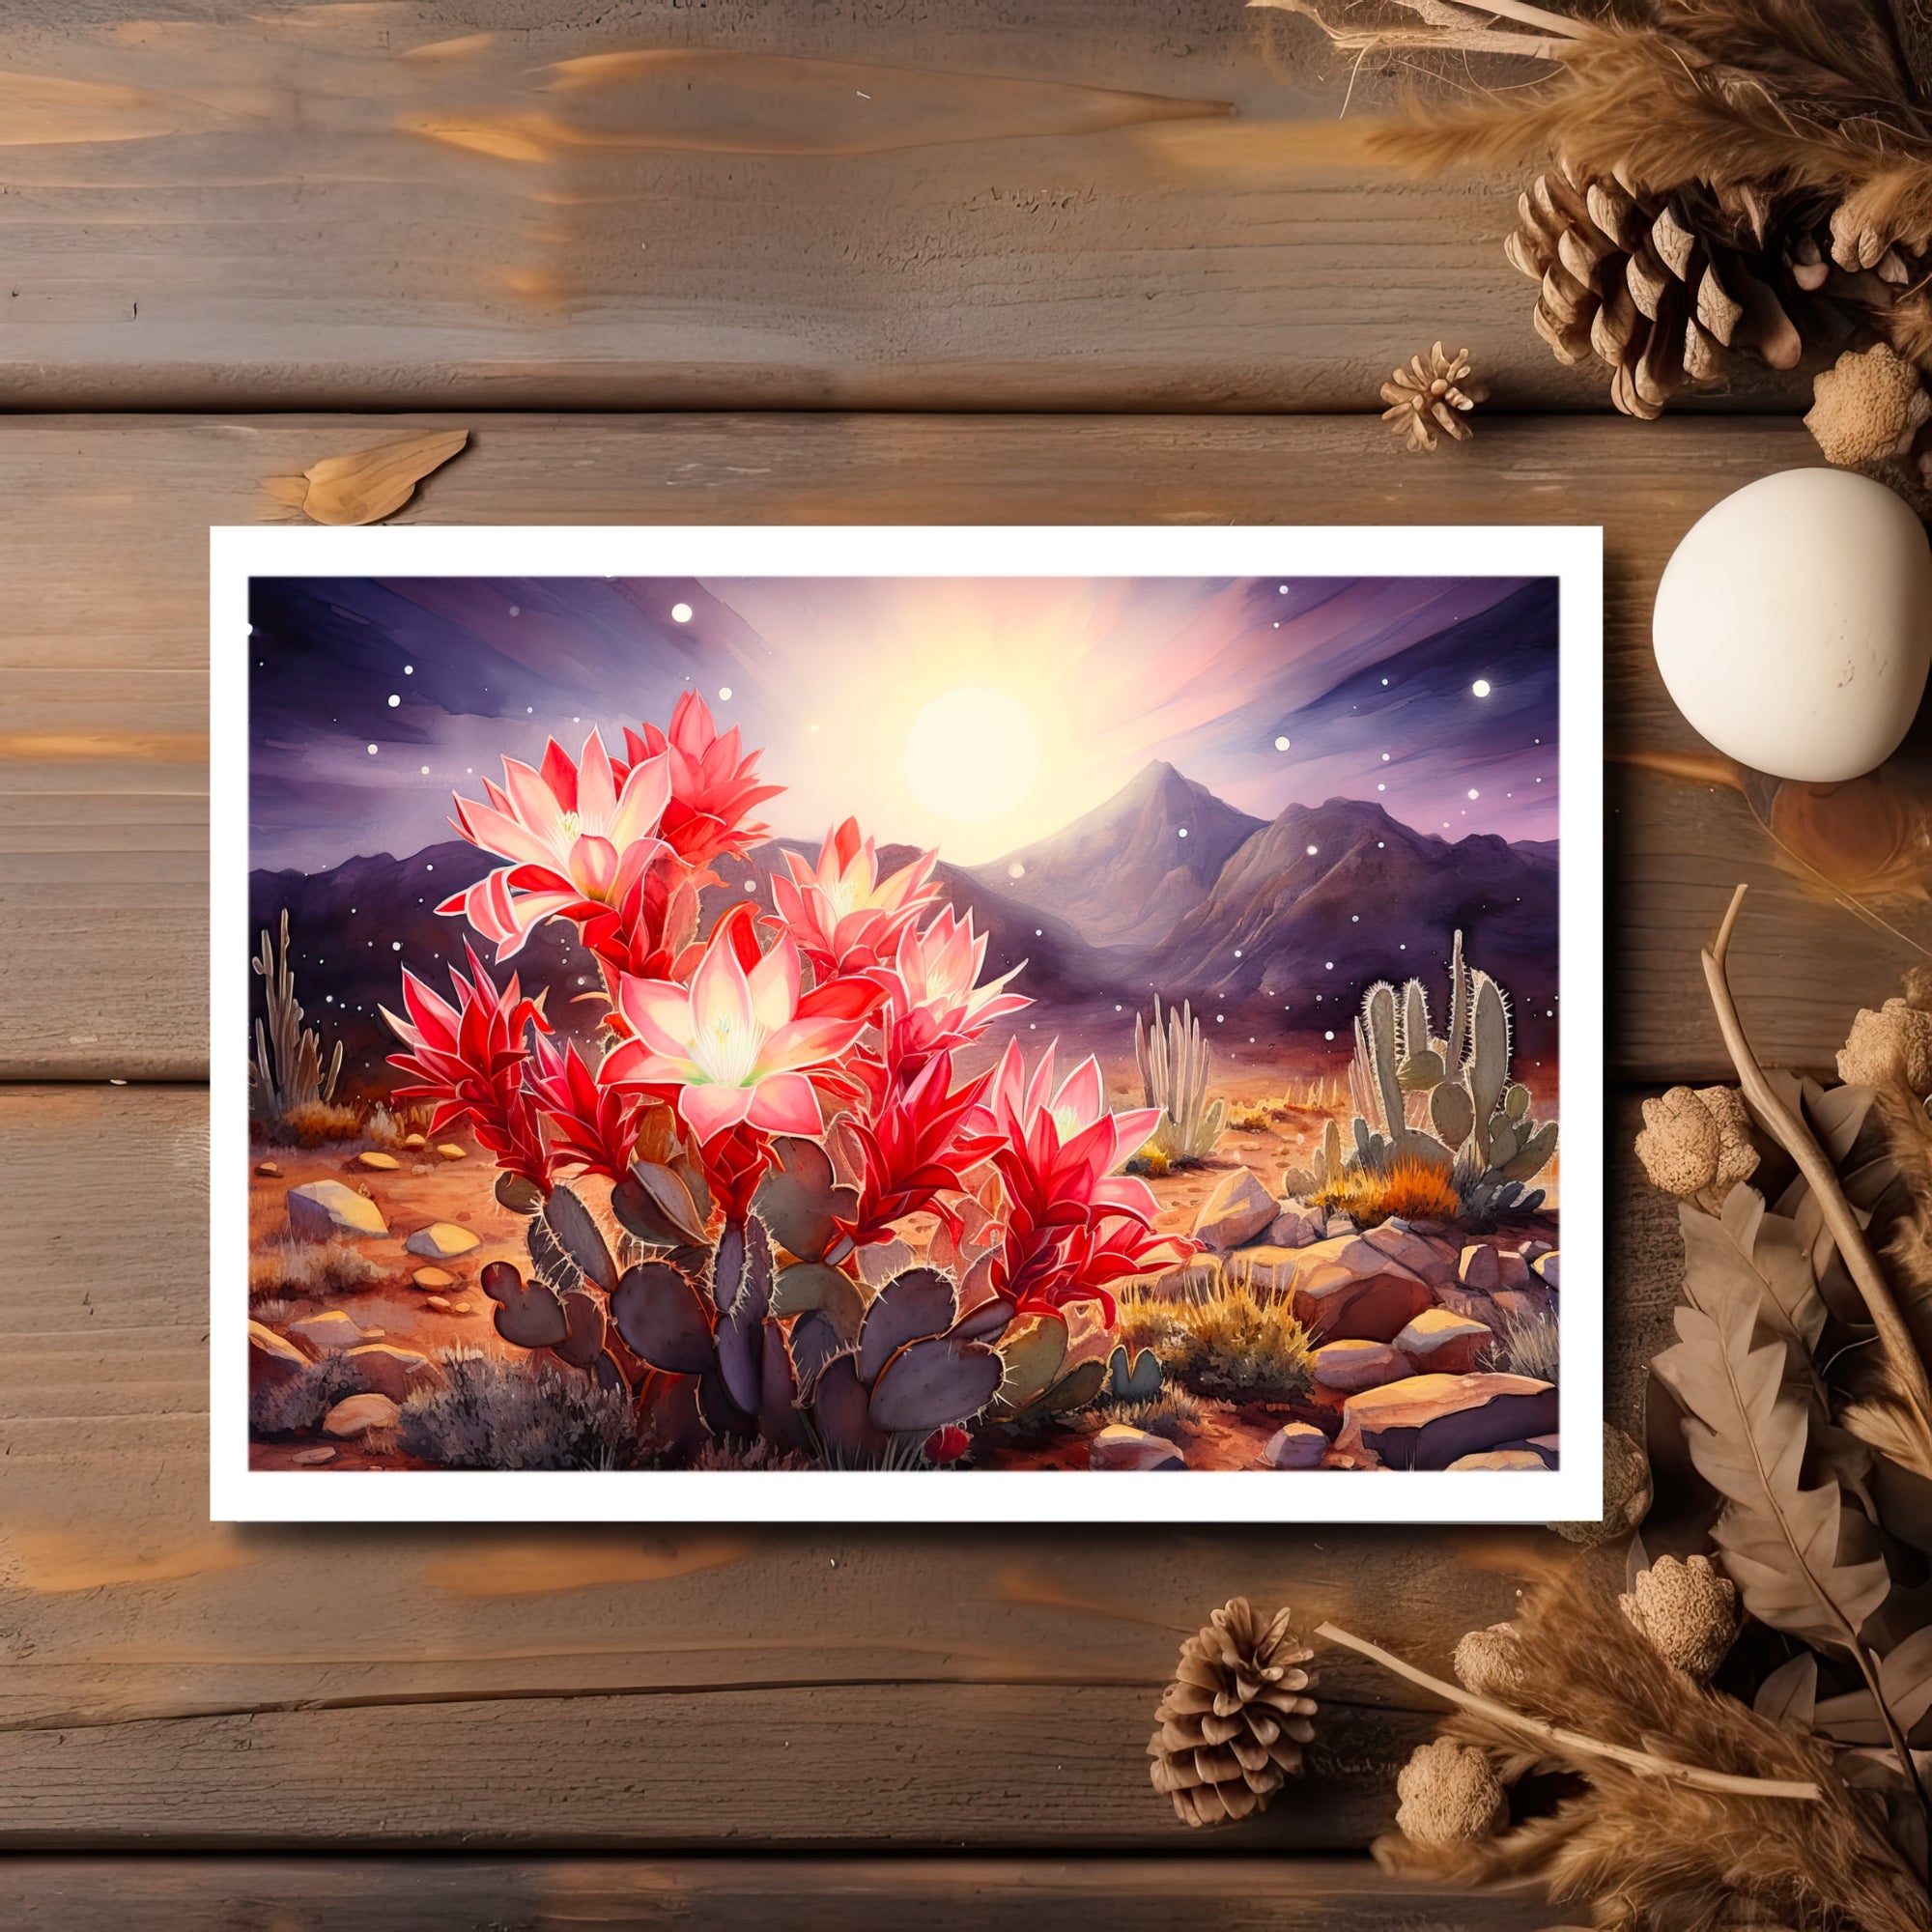 The Naughty Equestrian Wholesale Supplier Desert Cactus Sunrise Holiday Christmas Card